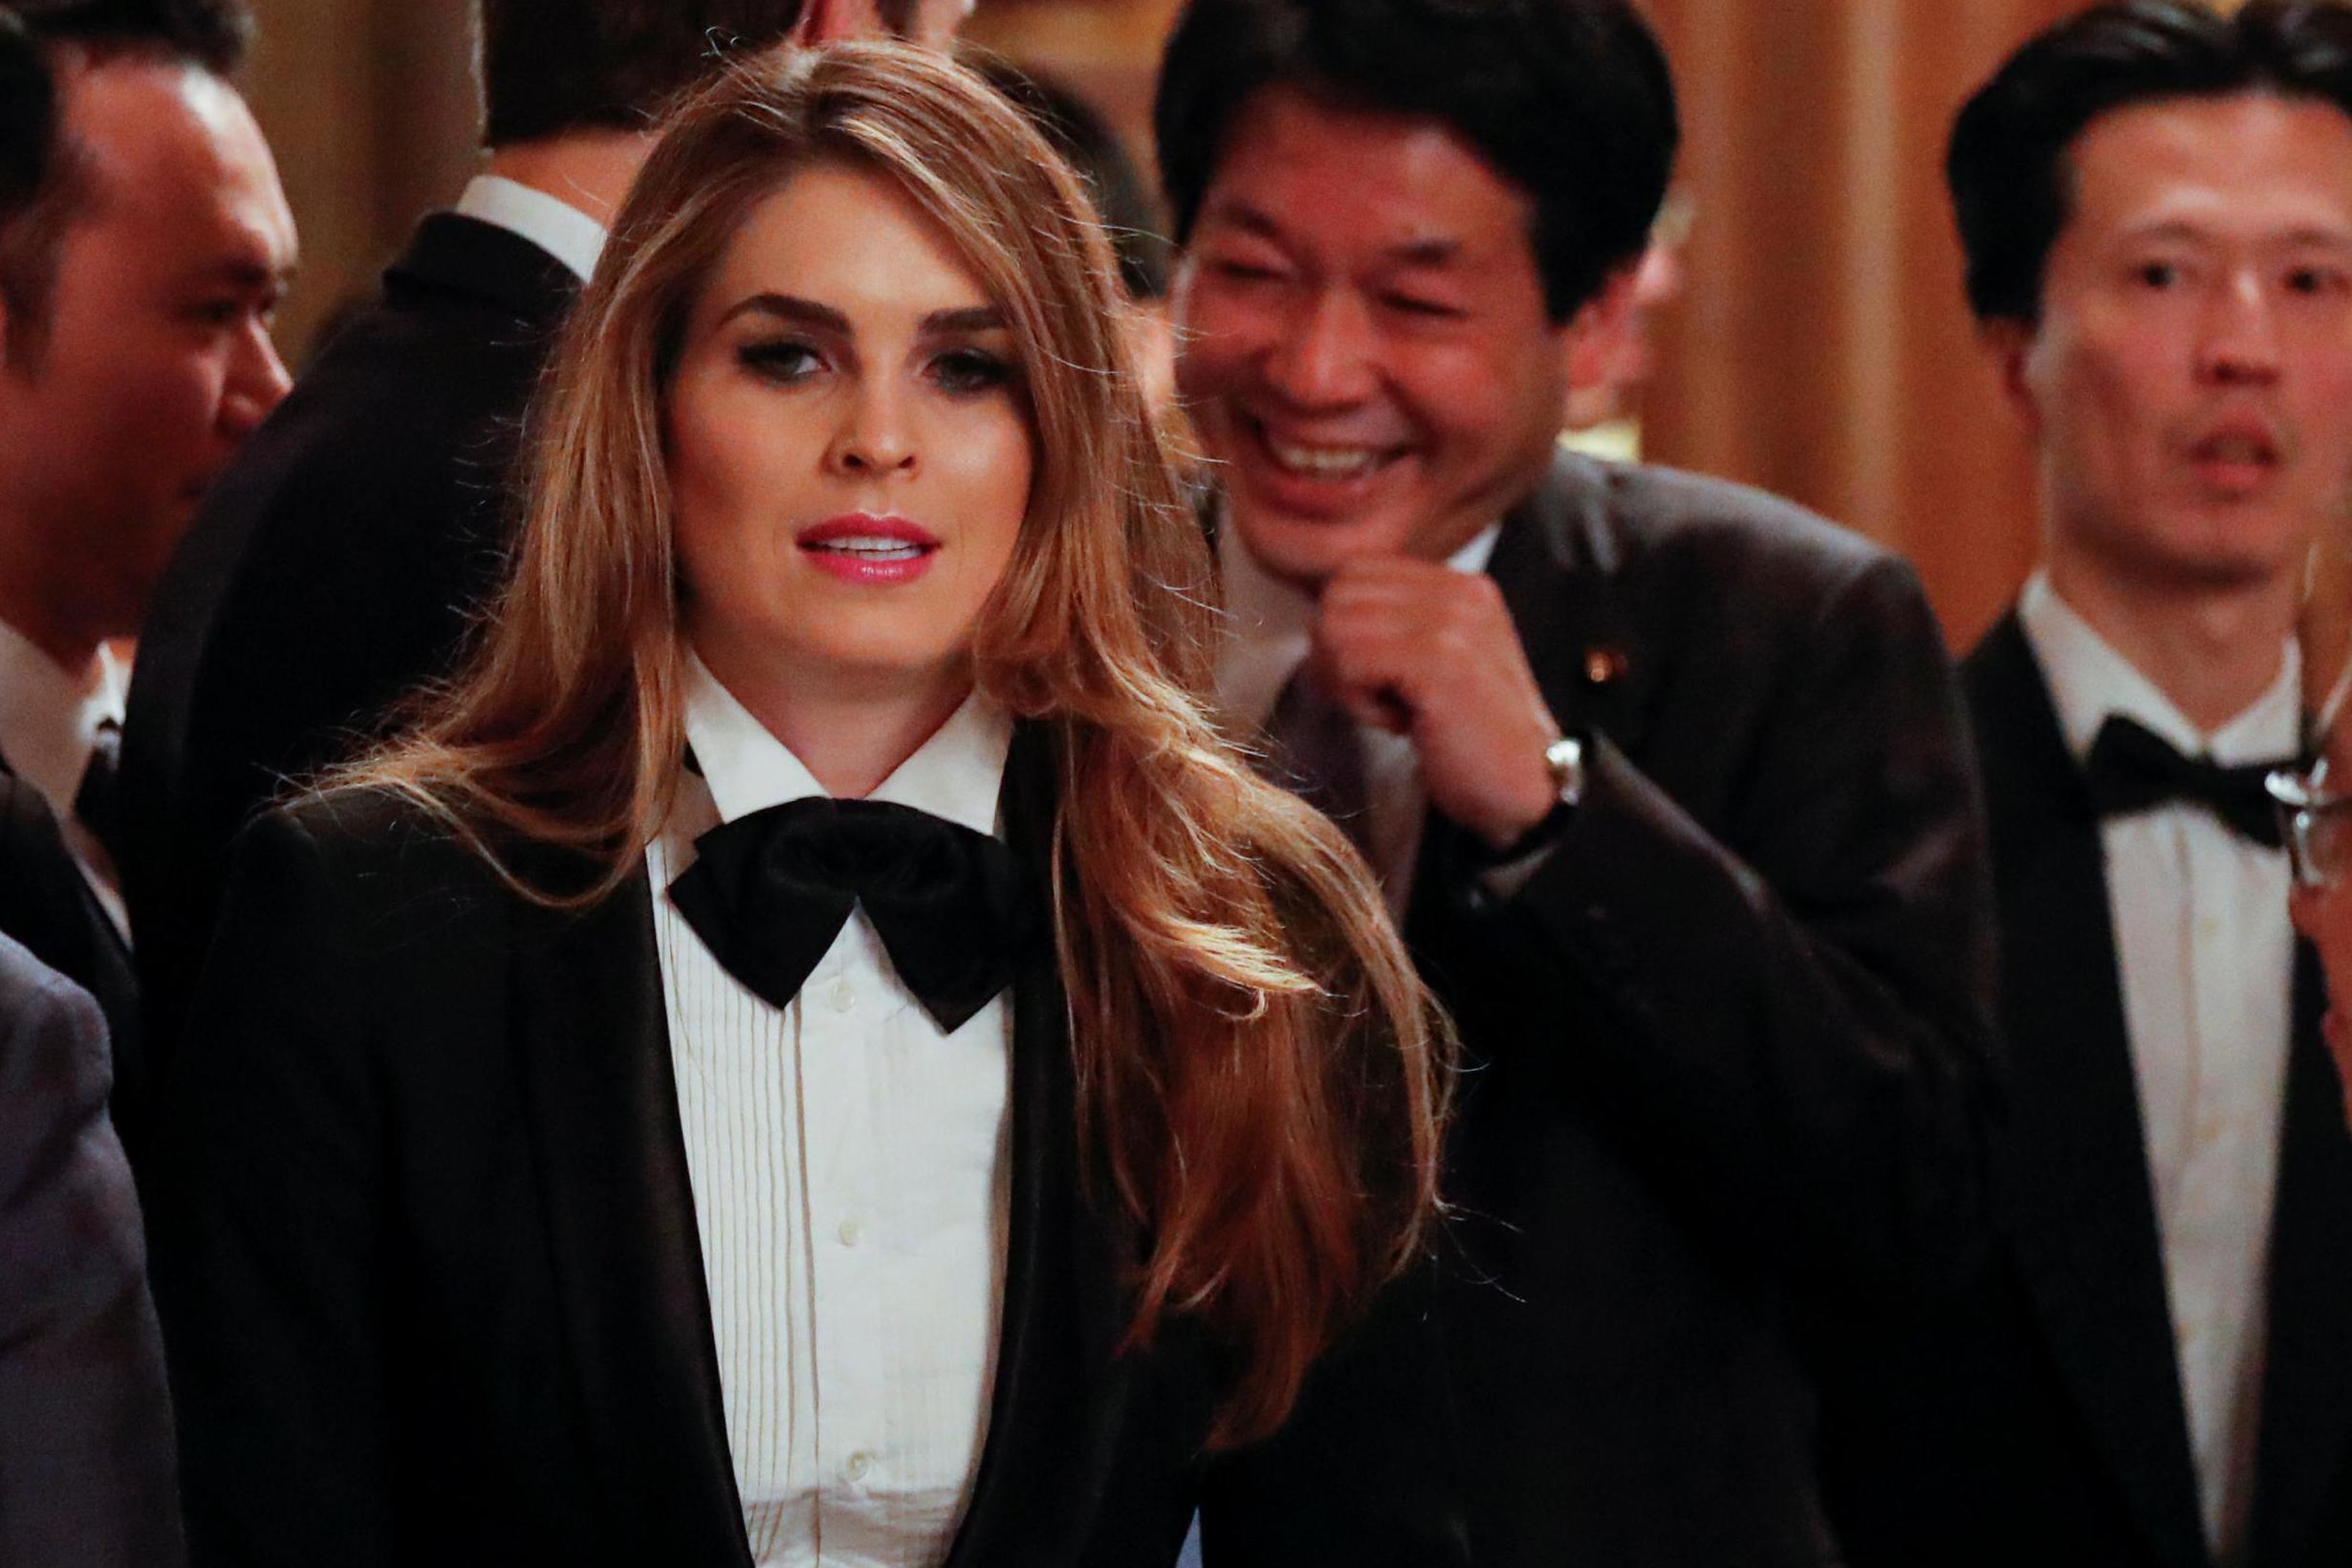 Hope Hicks dons a tuxedo at Japan state dinner | The Independent